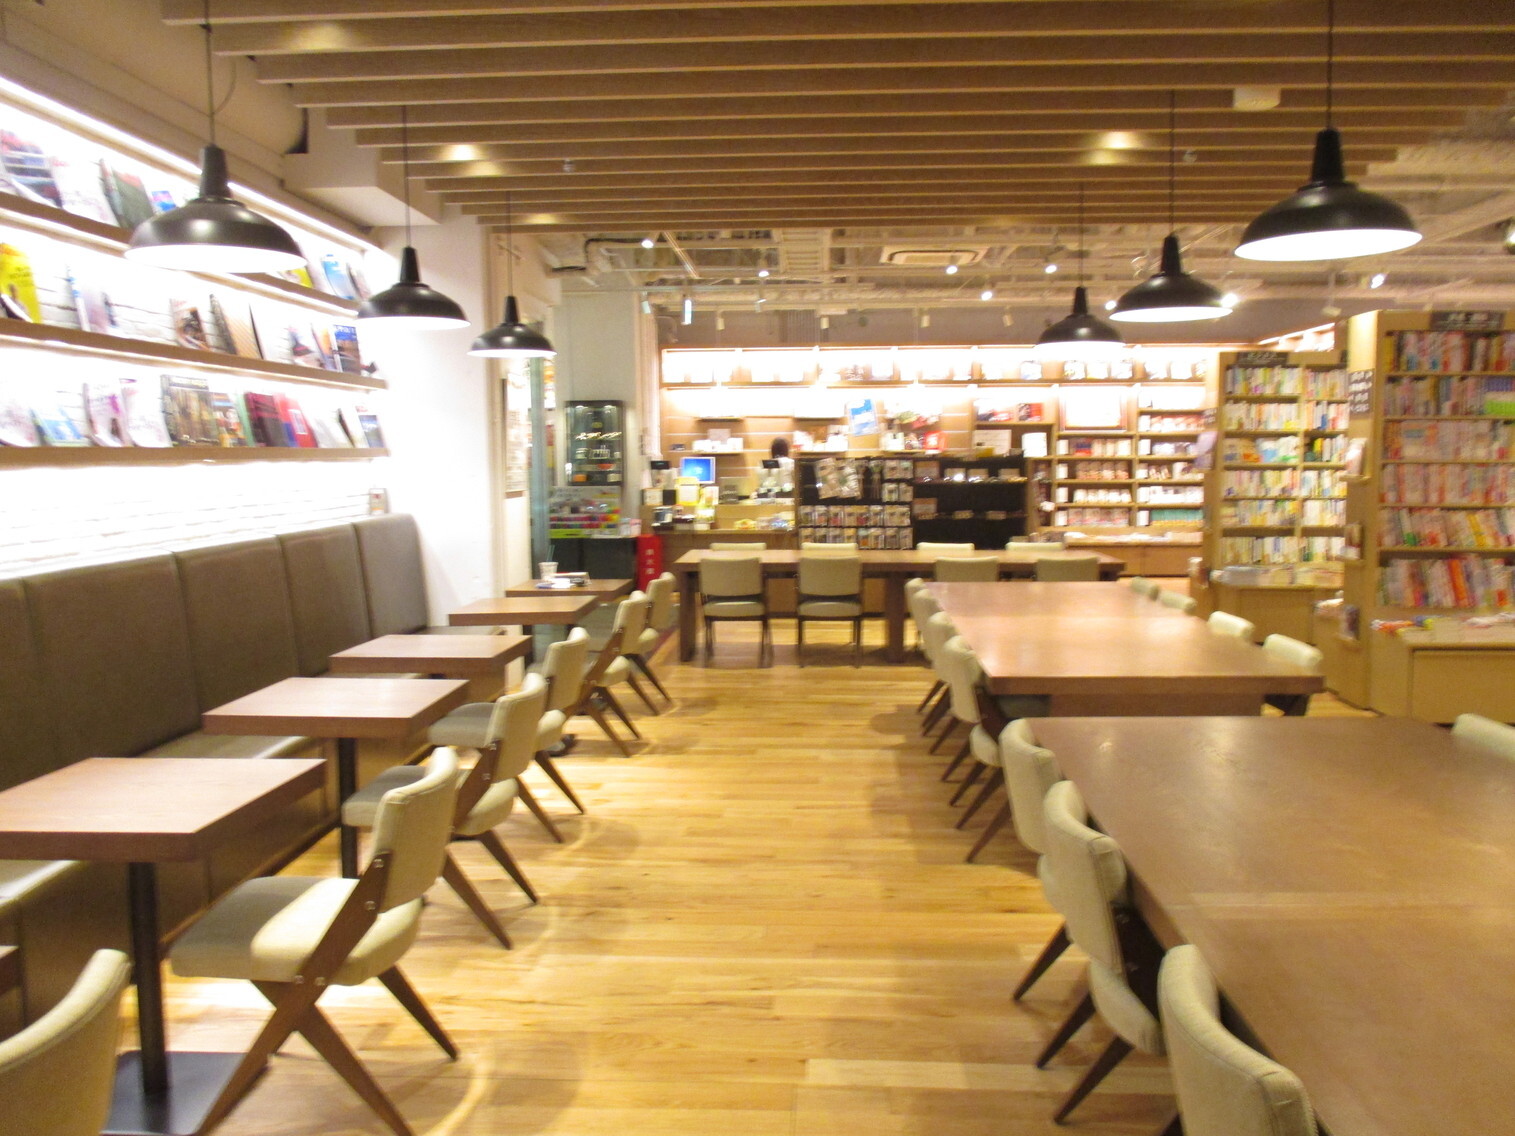 Fashionable Starbucks where you can read books and magazines of TSUTAYA for free! Let's check 